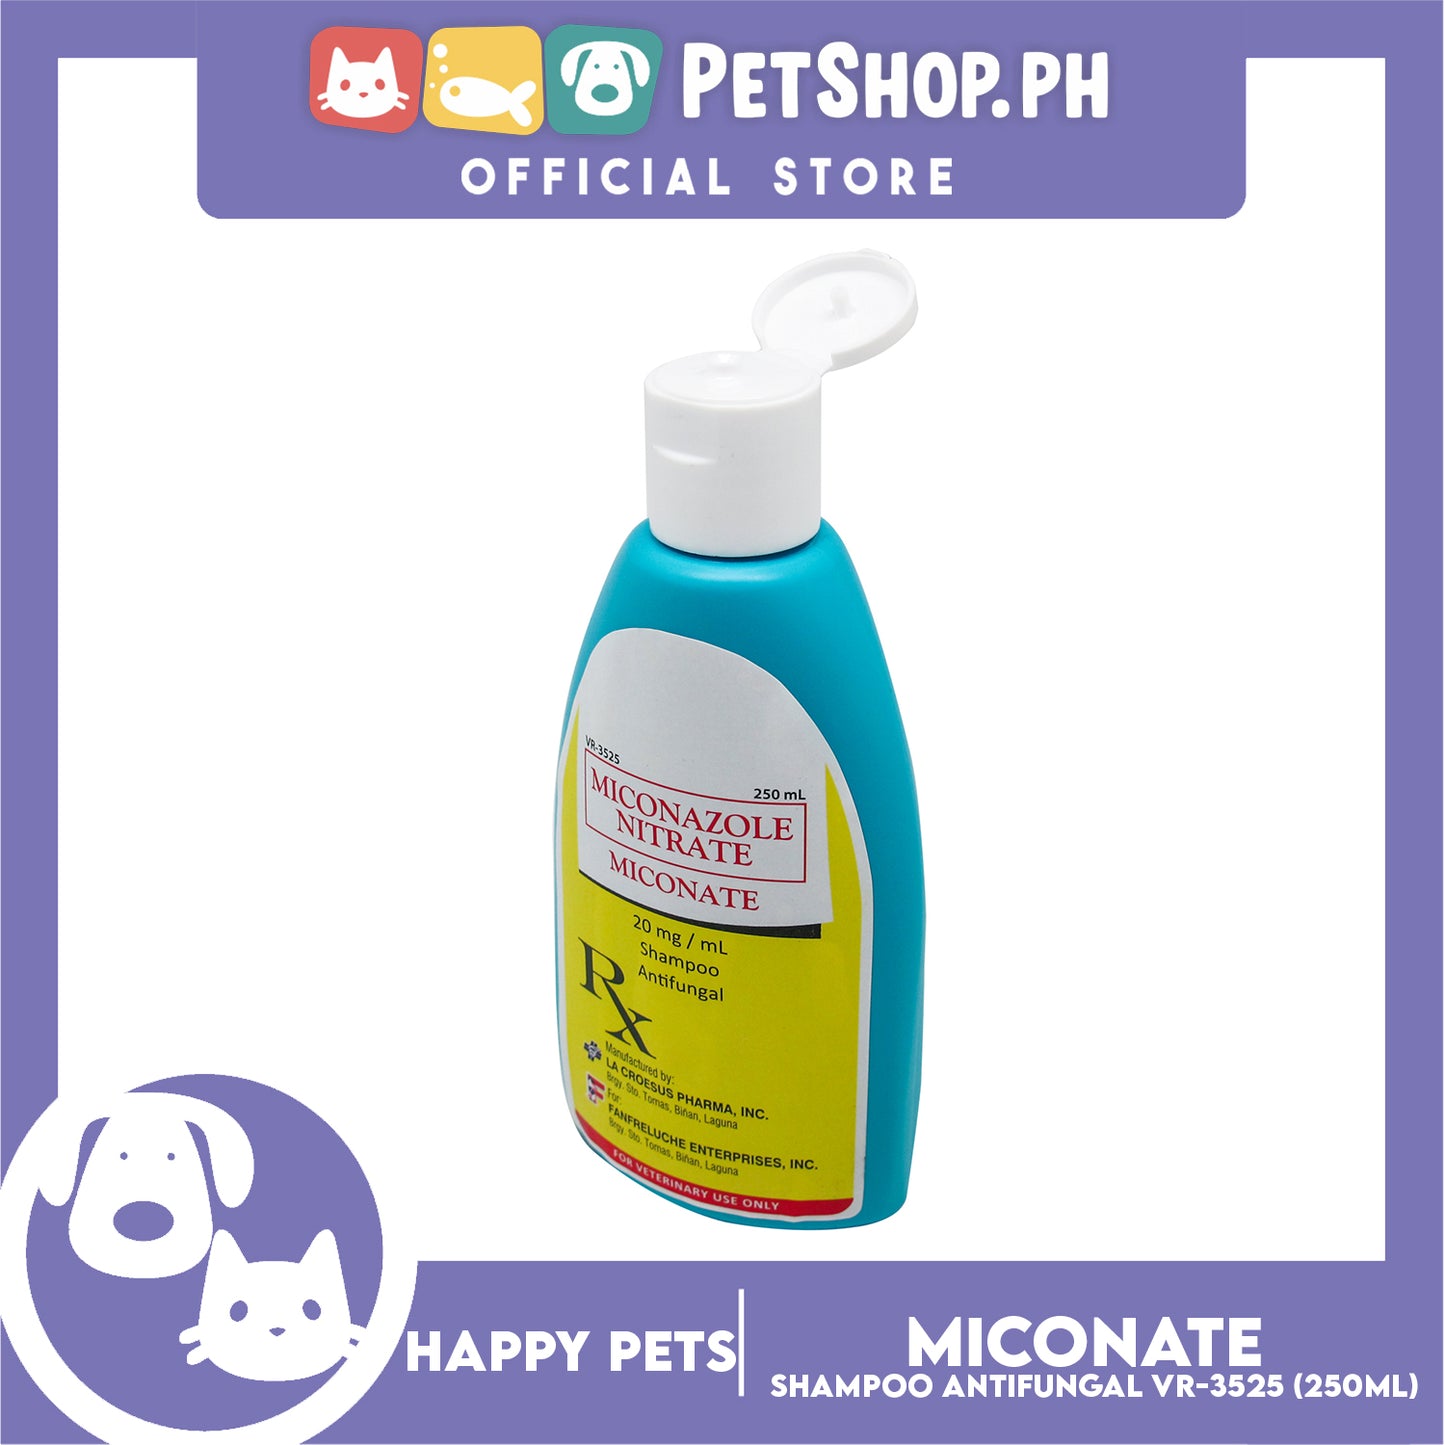 Happy Pets Miconazole Nitrate Miconate 250ml Antifungal Shampoo for Dogs and Cats